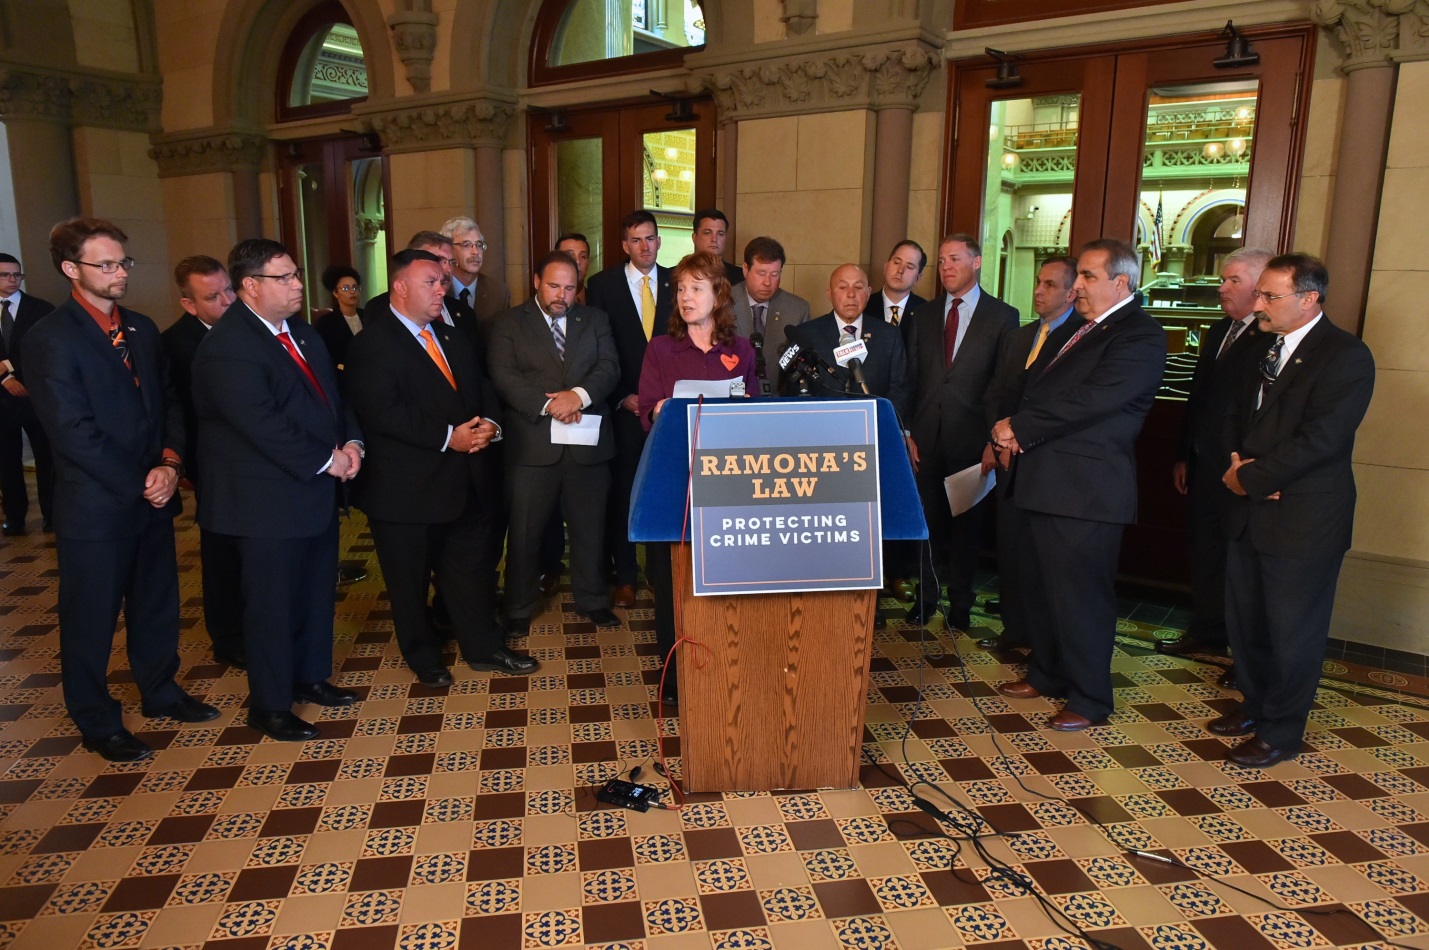 Assemblyman Brian Manktelow (R,C,I,Ref-Lyons) joined his Assembly colleagues and Ramona Bantle-Fahy, a victim of a violent sexual assault, at a press conference on Tuesday, May 21, 2019 to call for th